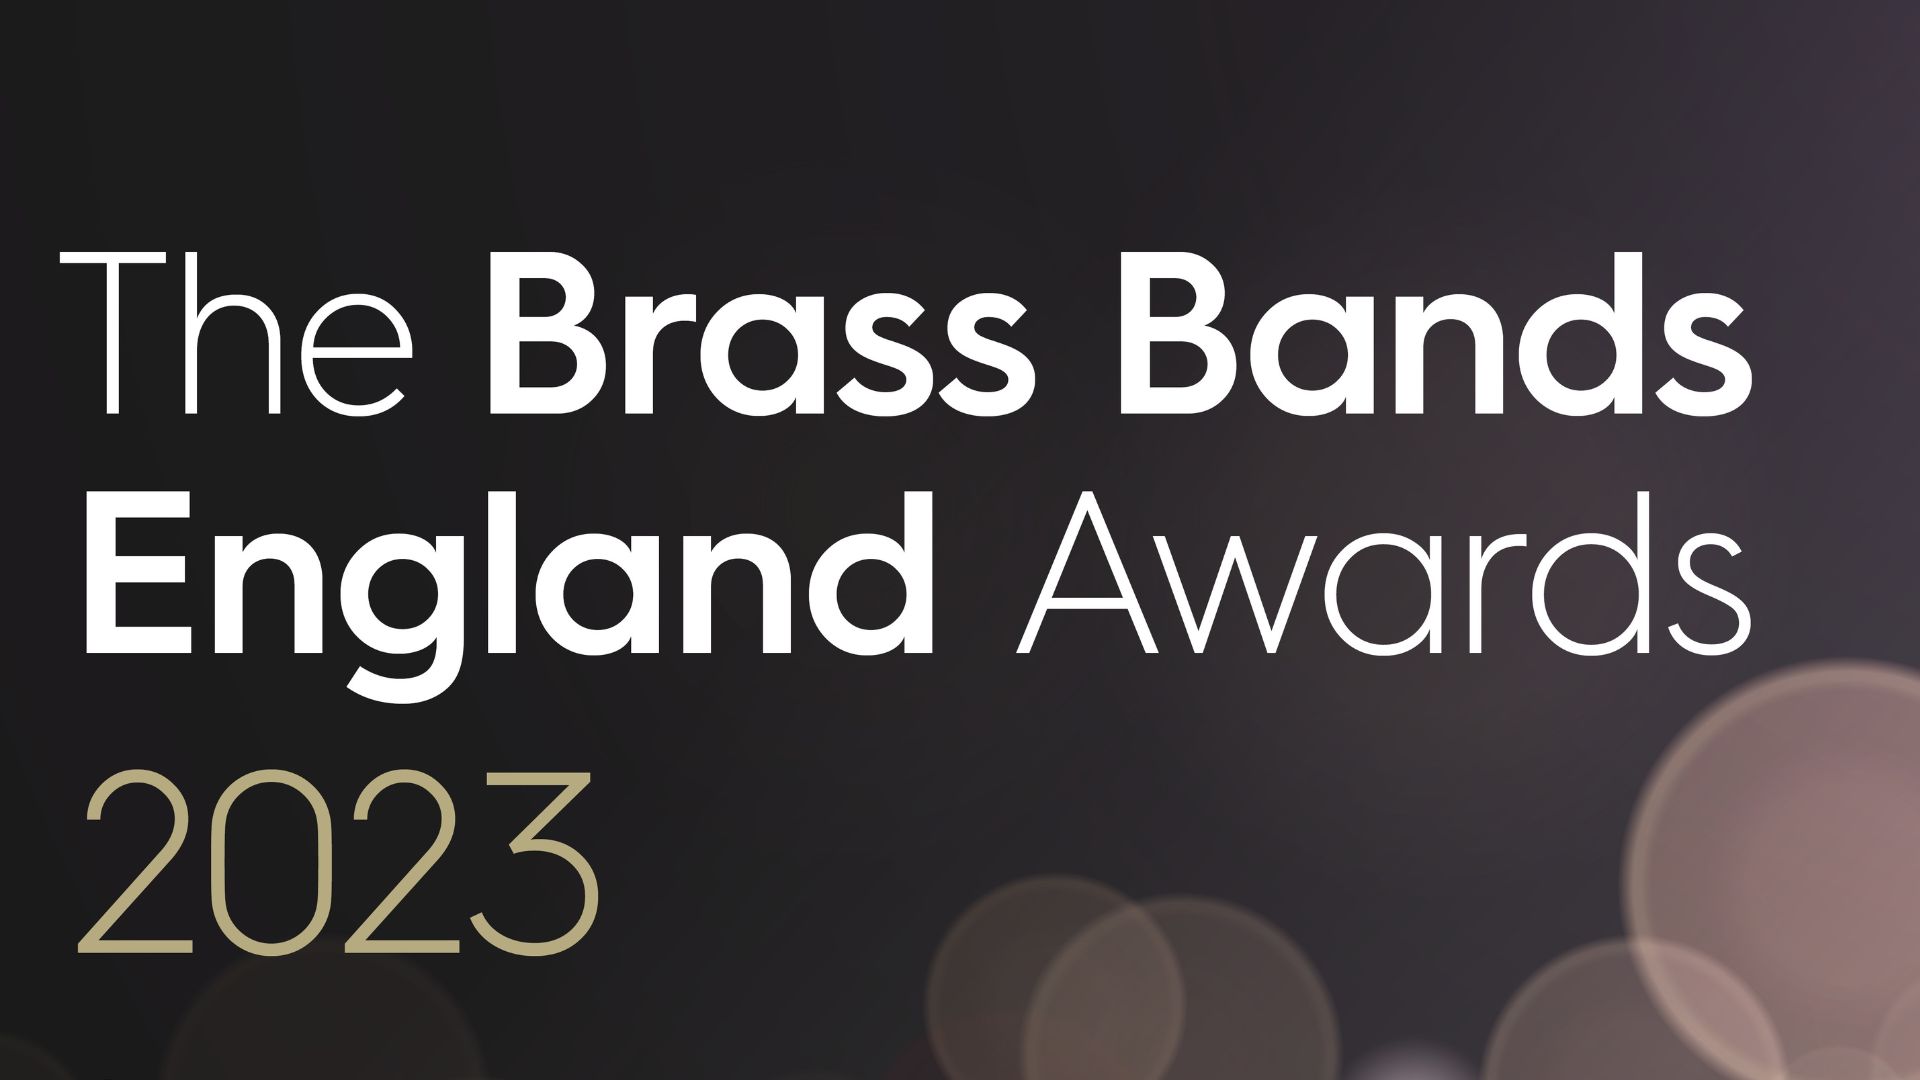 The Brass Bands England Awards